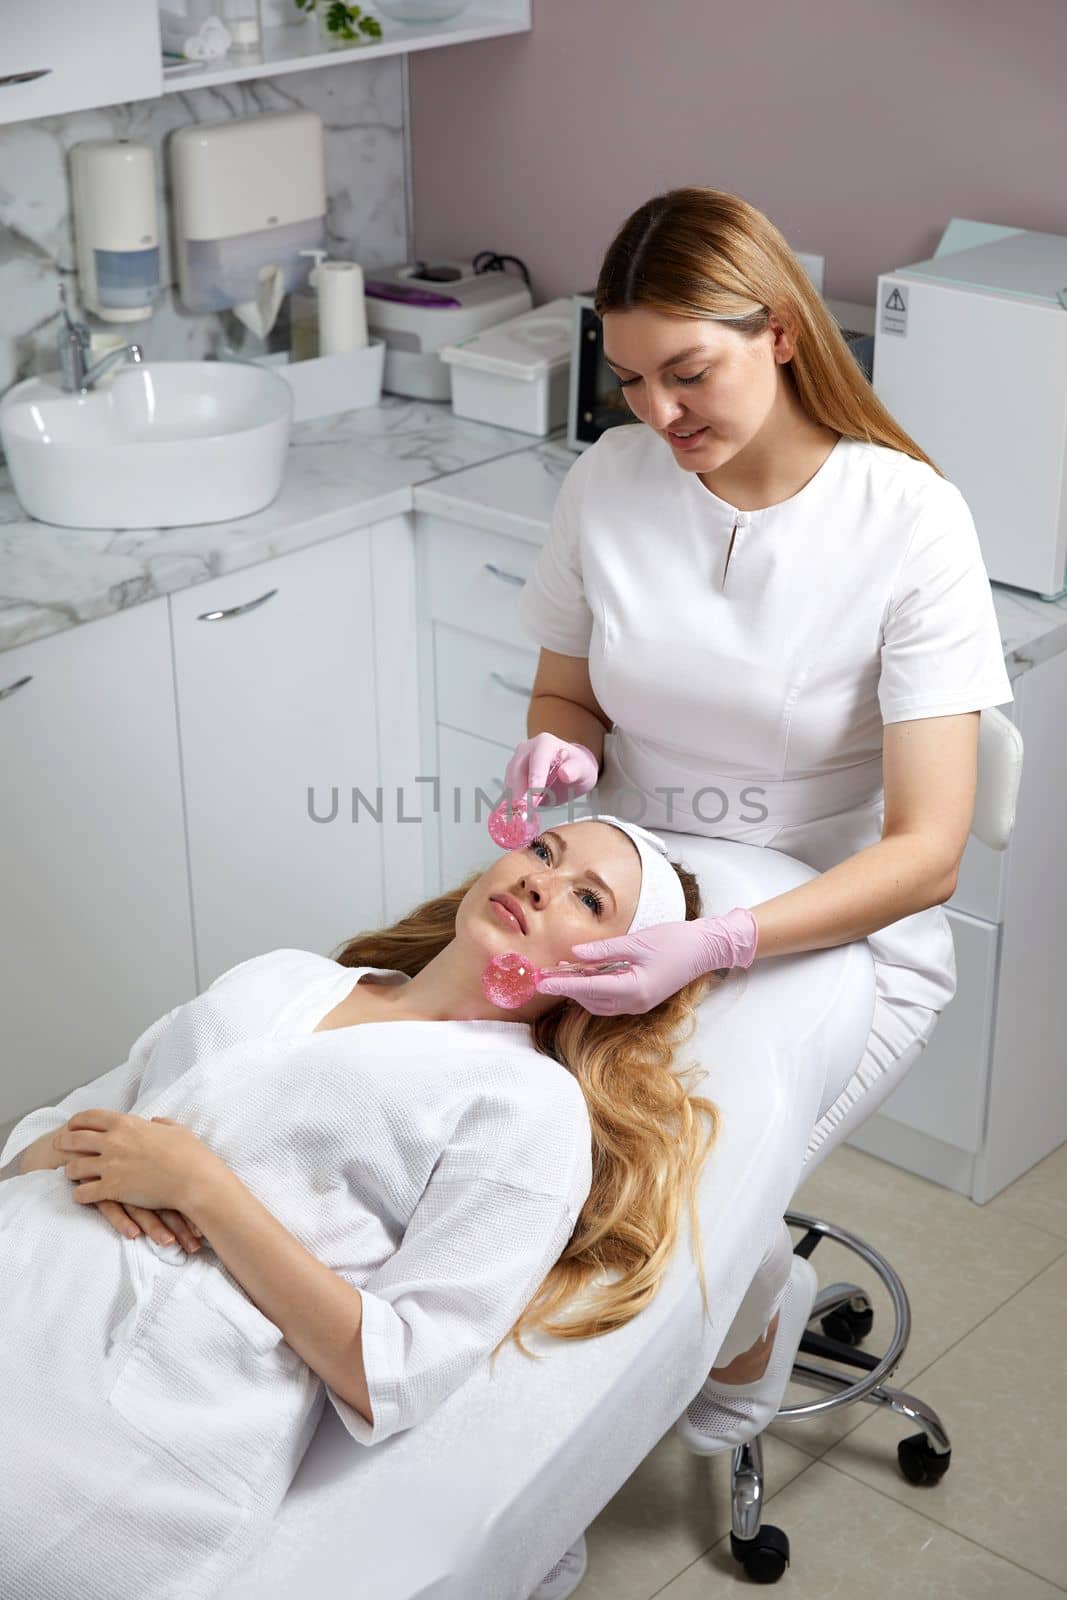 Young woman receiving facial massage with glass balls in beauty salon, concept of face massage in spa